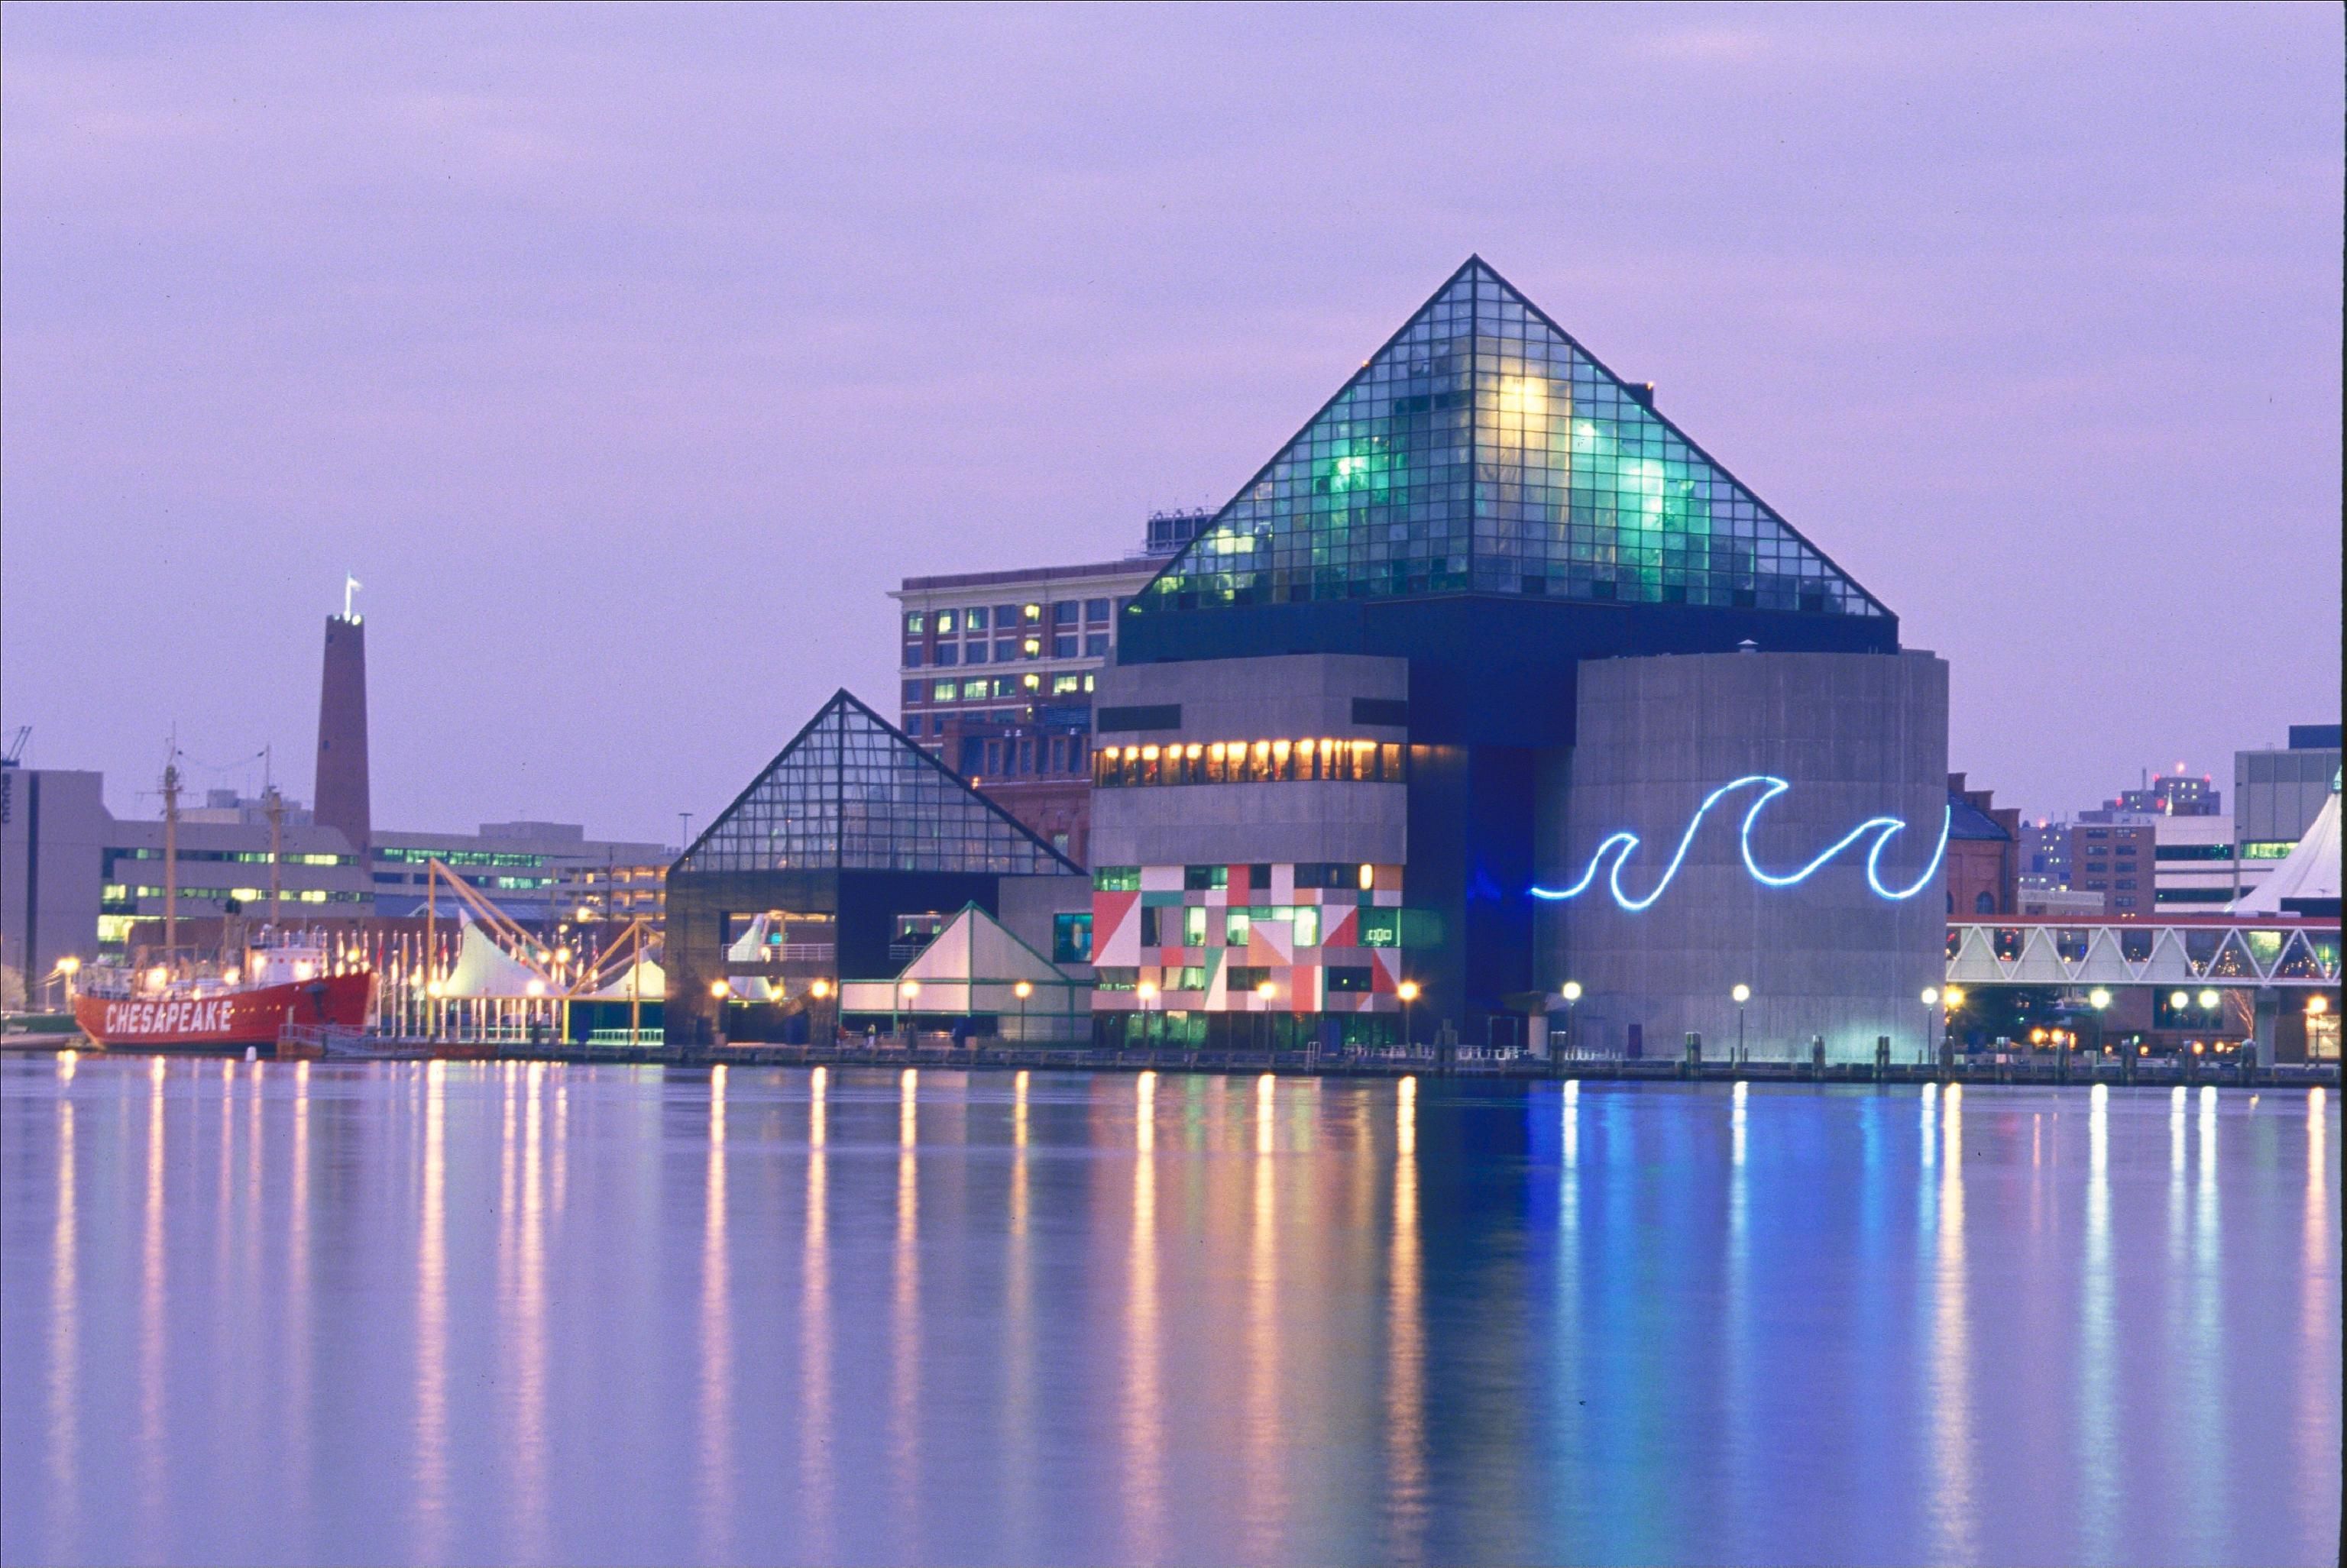 national aquarium - Baltimore | Places I've Been in the USA | Pinterest